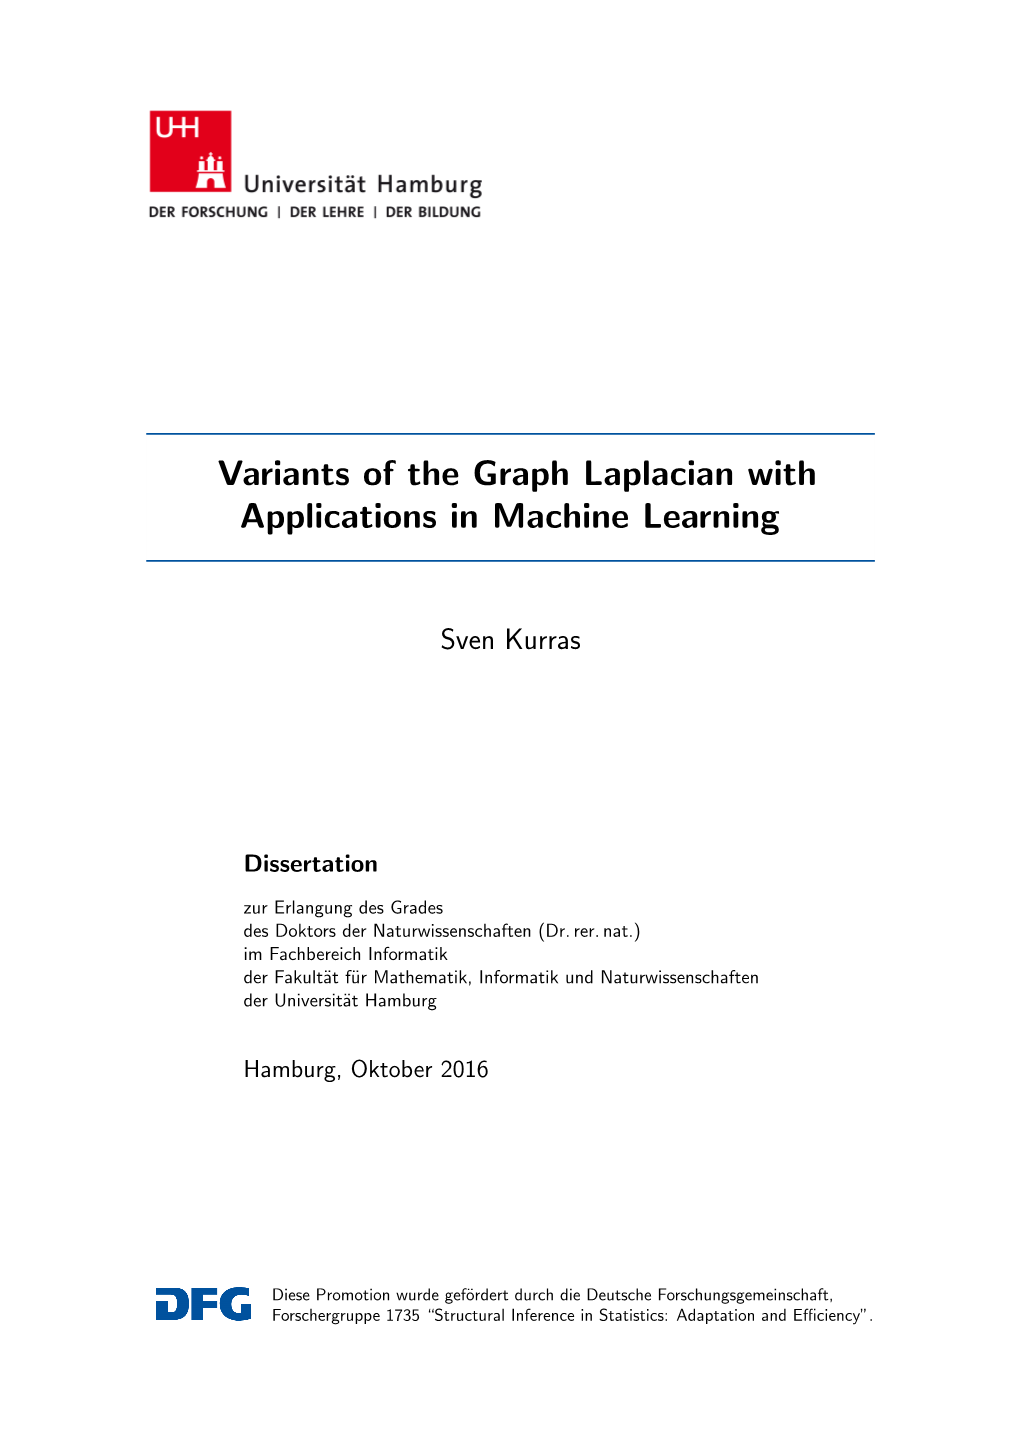 Variants of the Graph Laplacian with Applications in Machine Learning